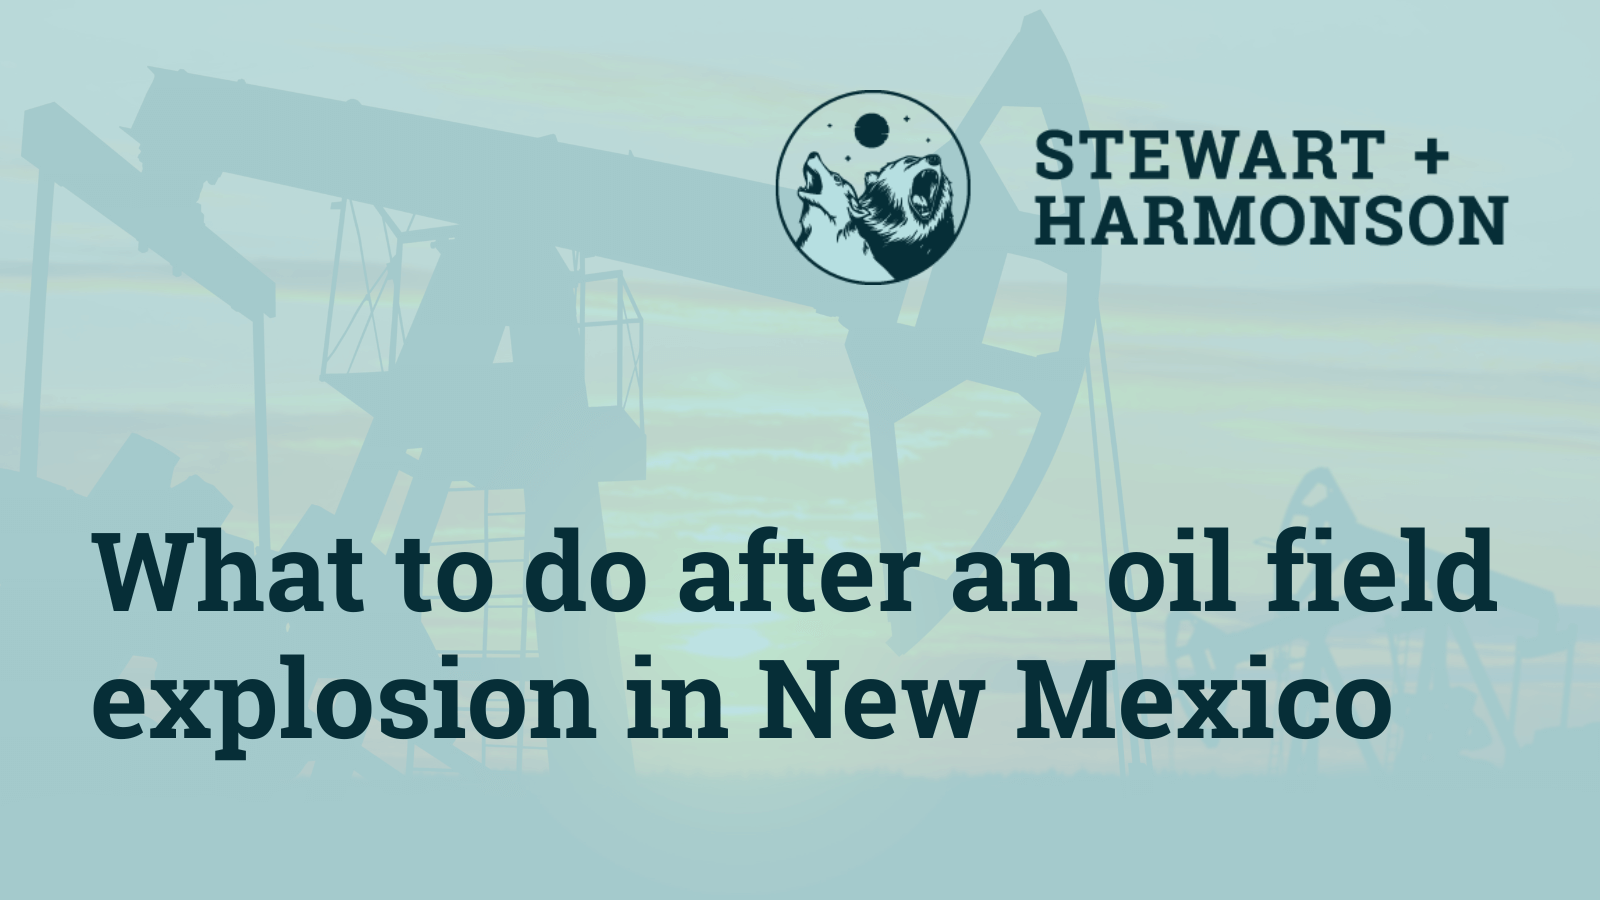 What to do after an oil field explosion in New Mexico - Stewart Harmonson Law Firm - New Mexico